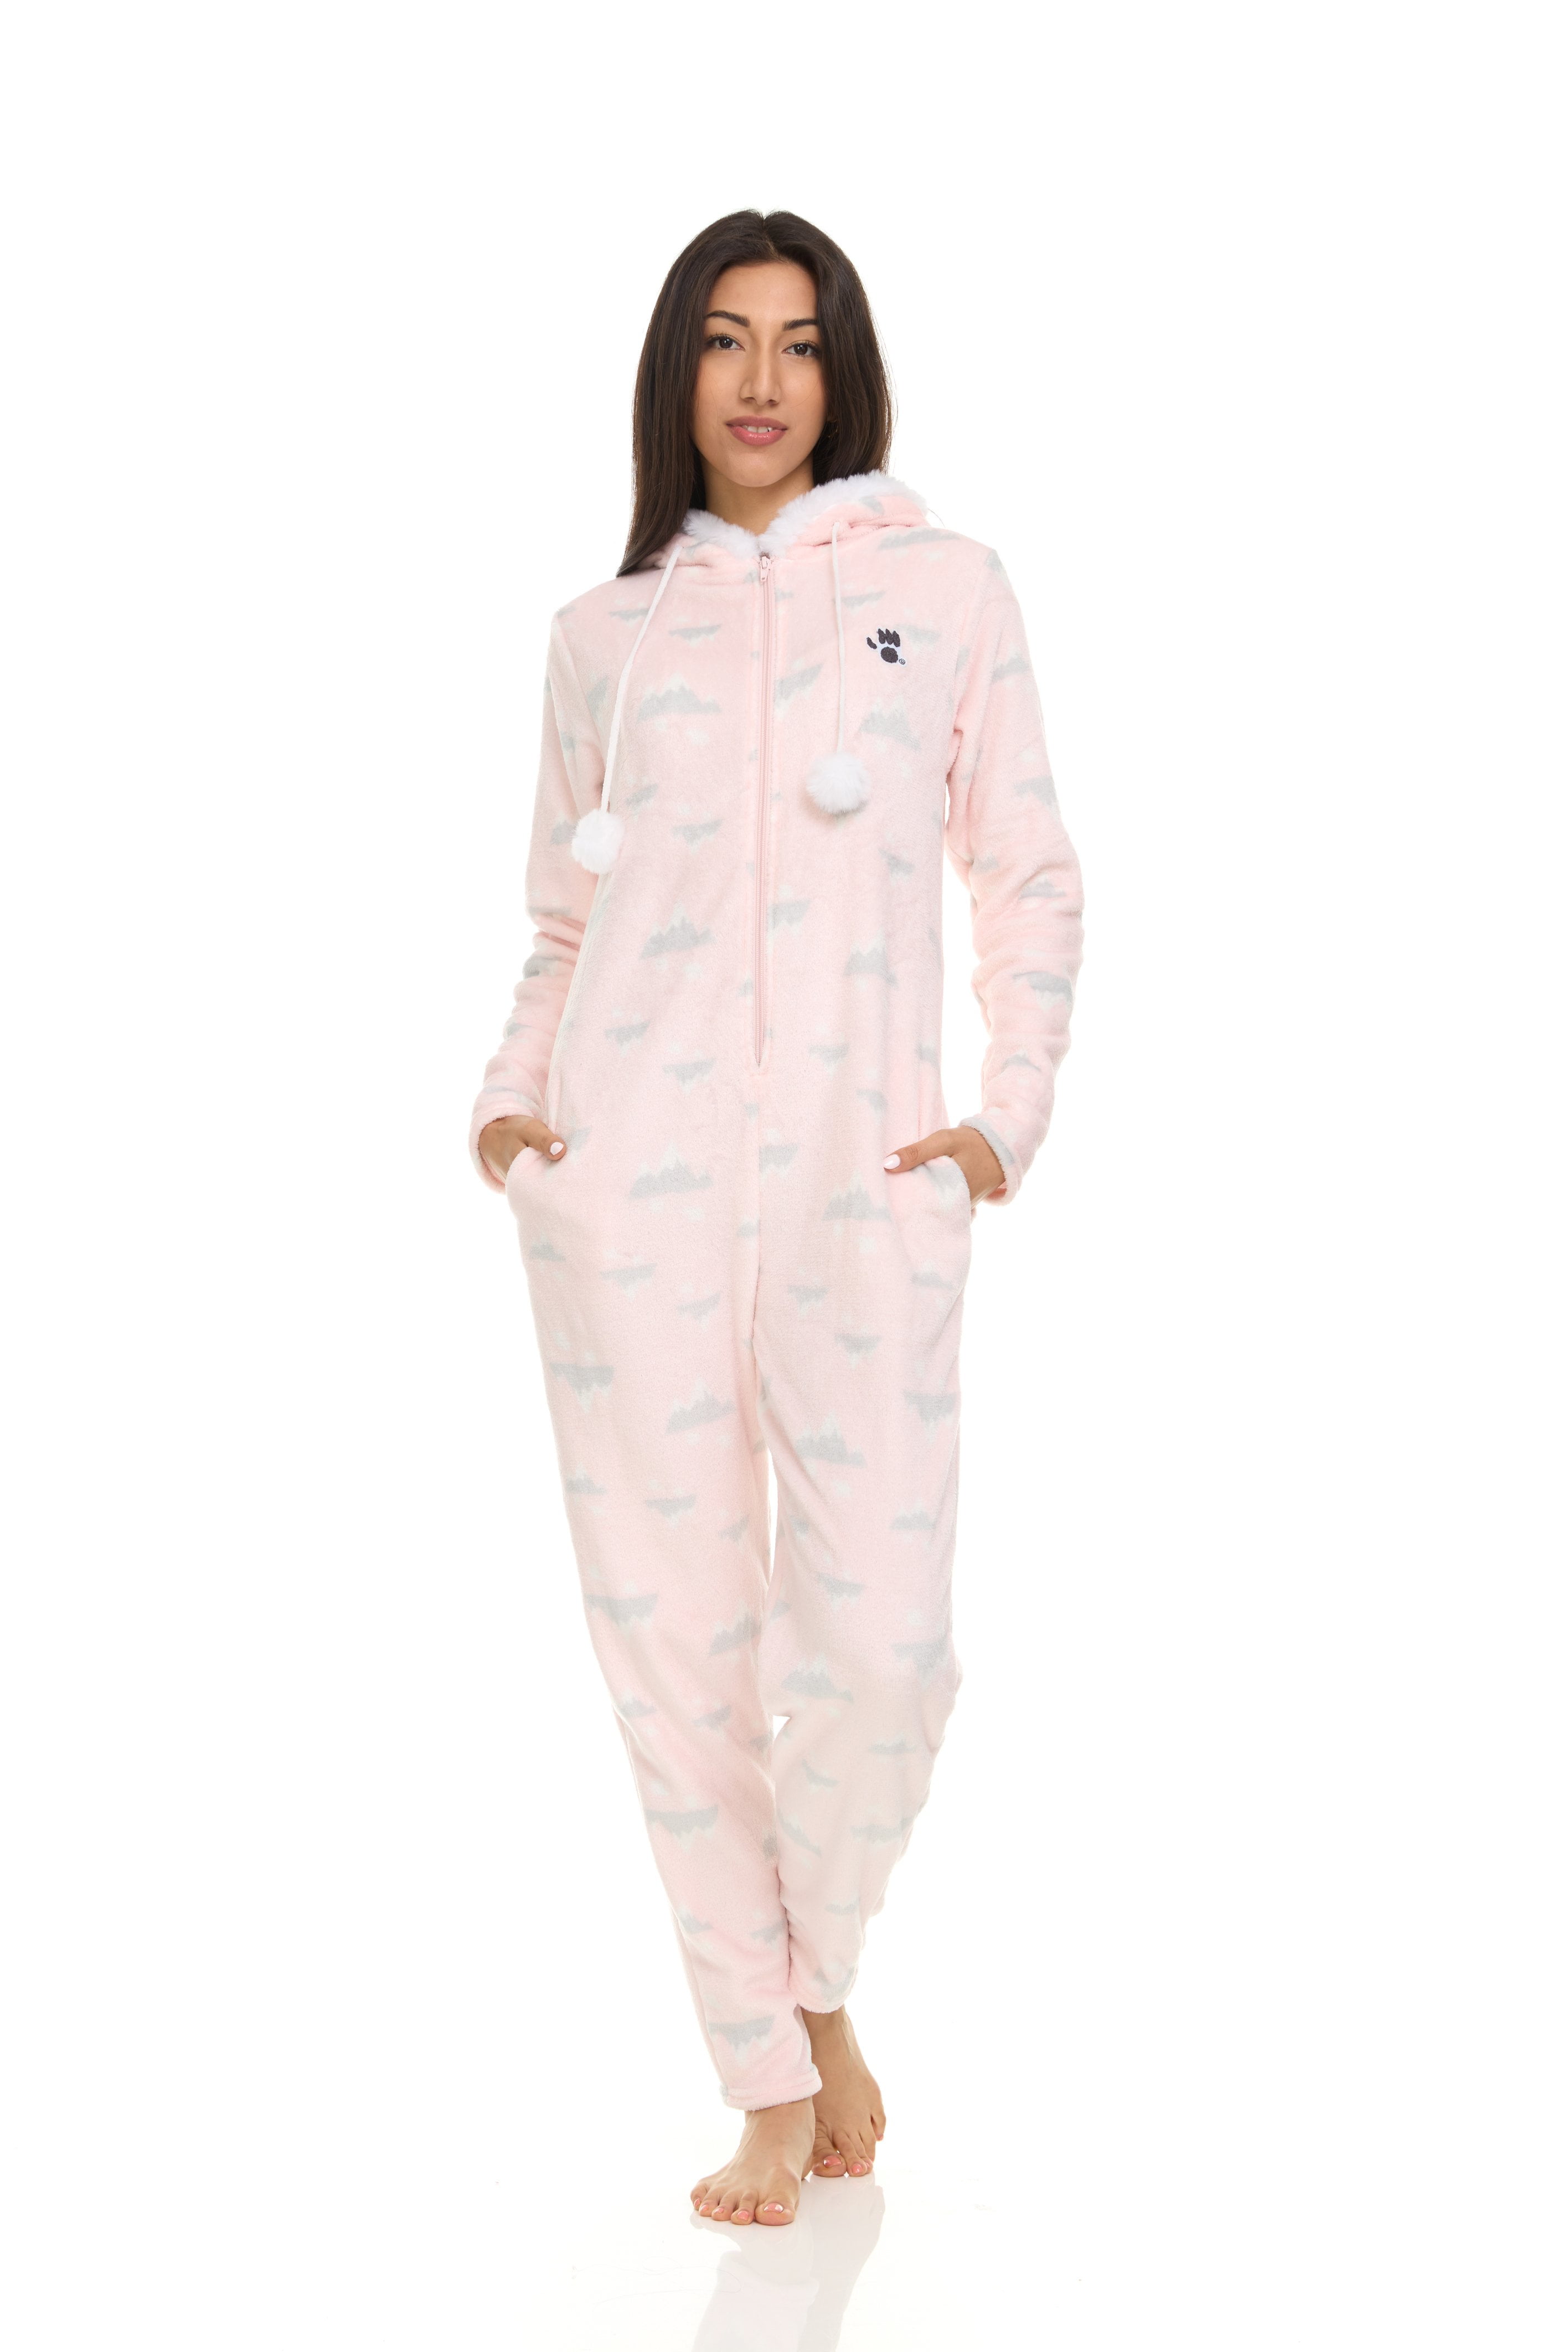 Bearpaw Women's Onesie Fuzzy Pajamas with Fluffy Hoodie and Ears, One ...